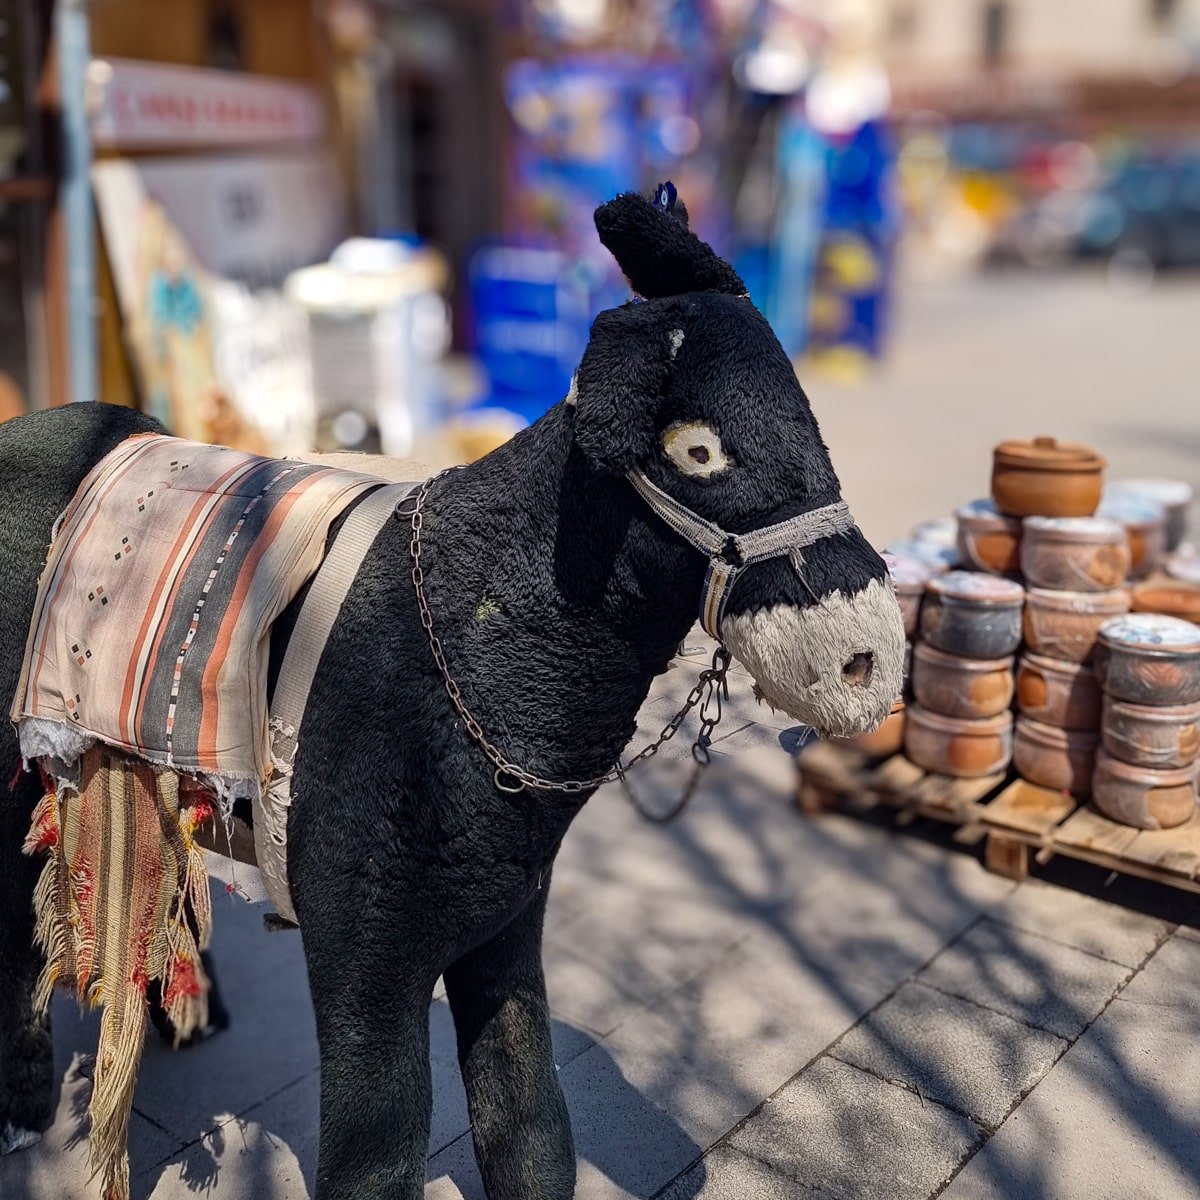 A life-sized model of a donkey wearing a traditional blanket and harness, displayed on a street with pottery in the background, is one of the intriguing things to do in Avanos Cappadoc